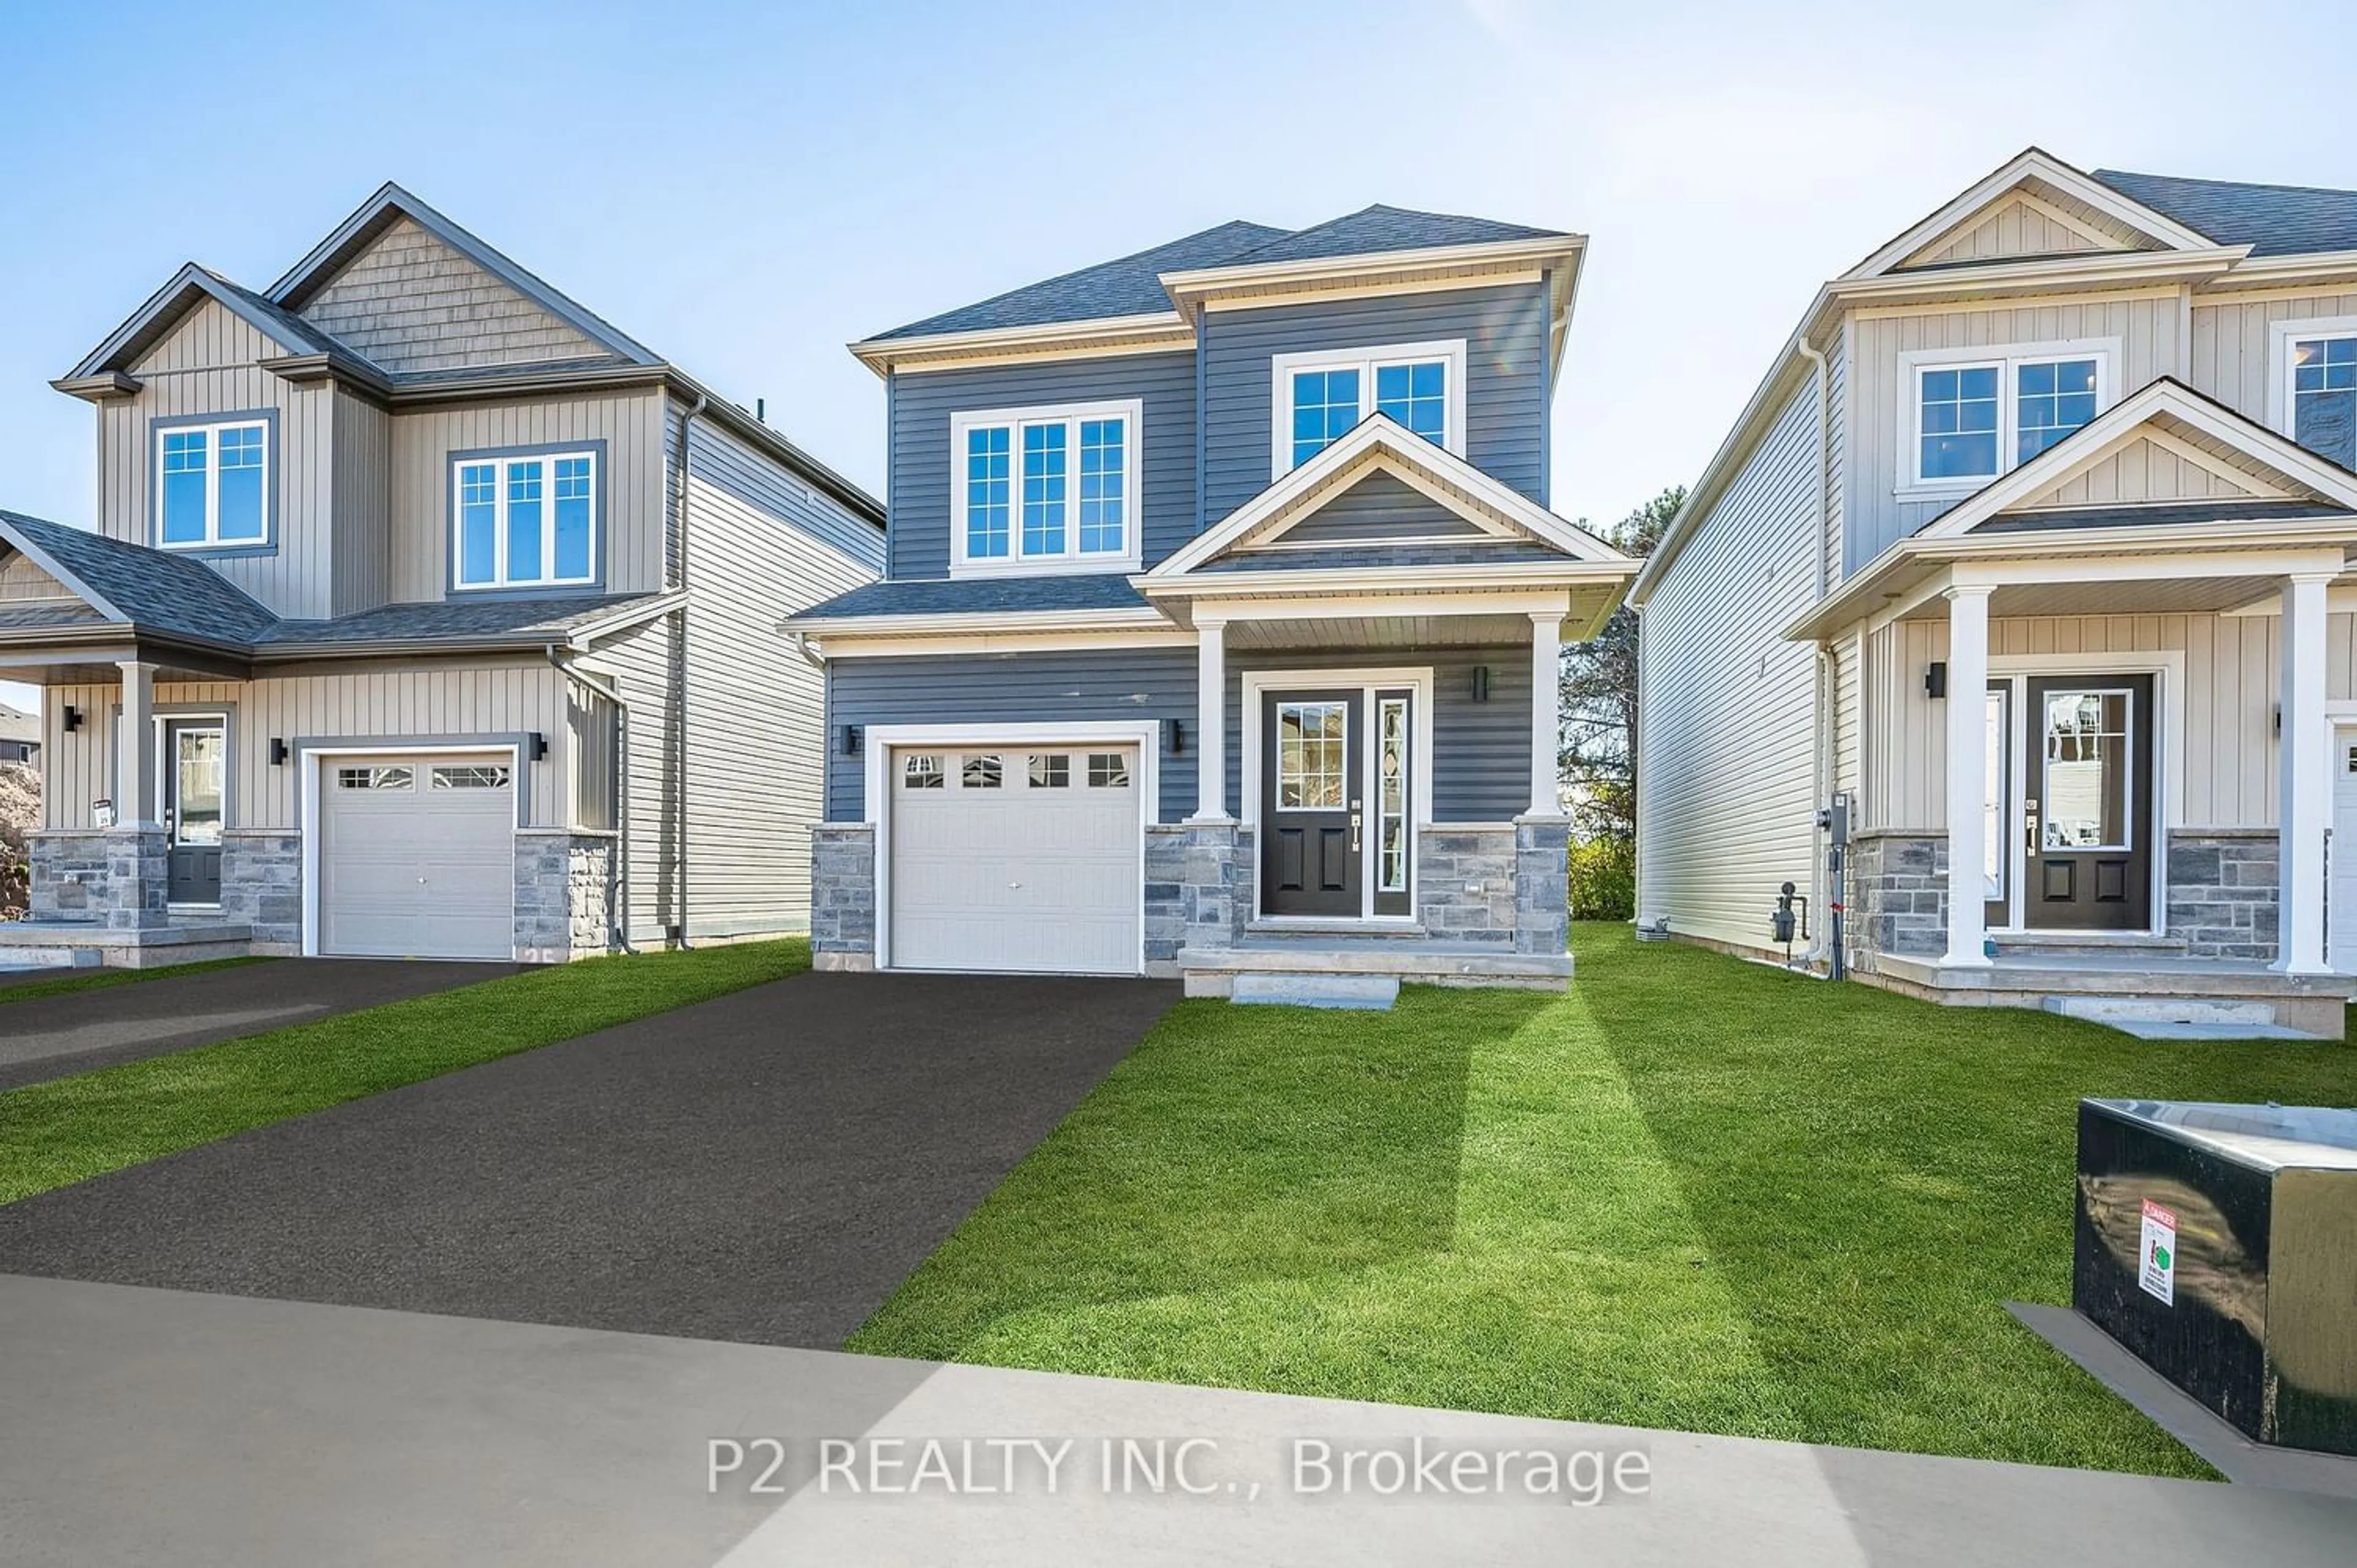 Frontside or backside of a home for 28 Bromley Dr, St. Catharines Ontario L2M 1R1